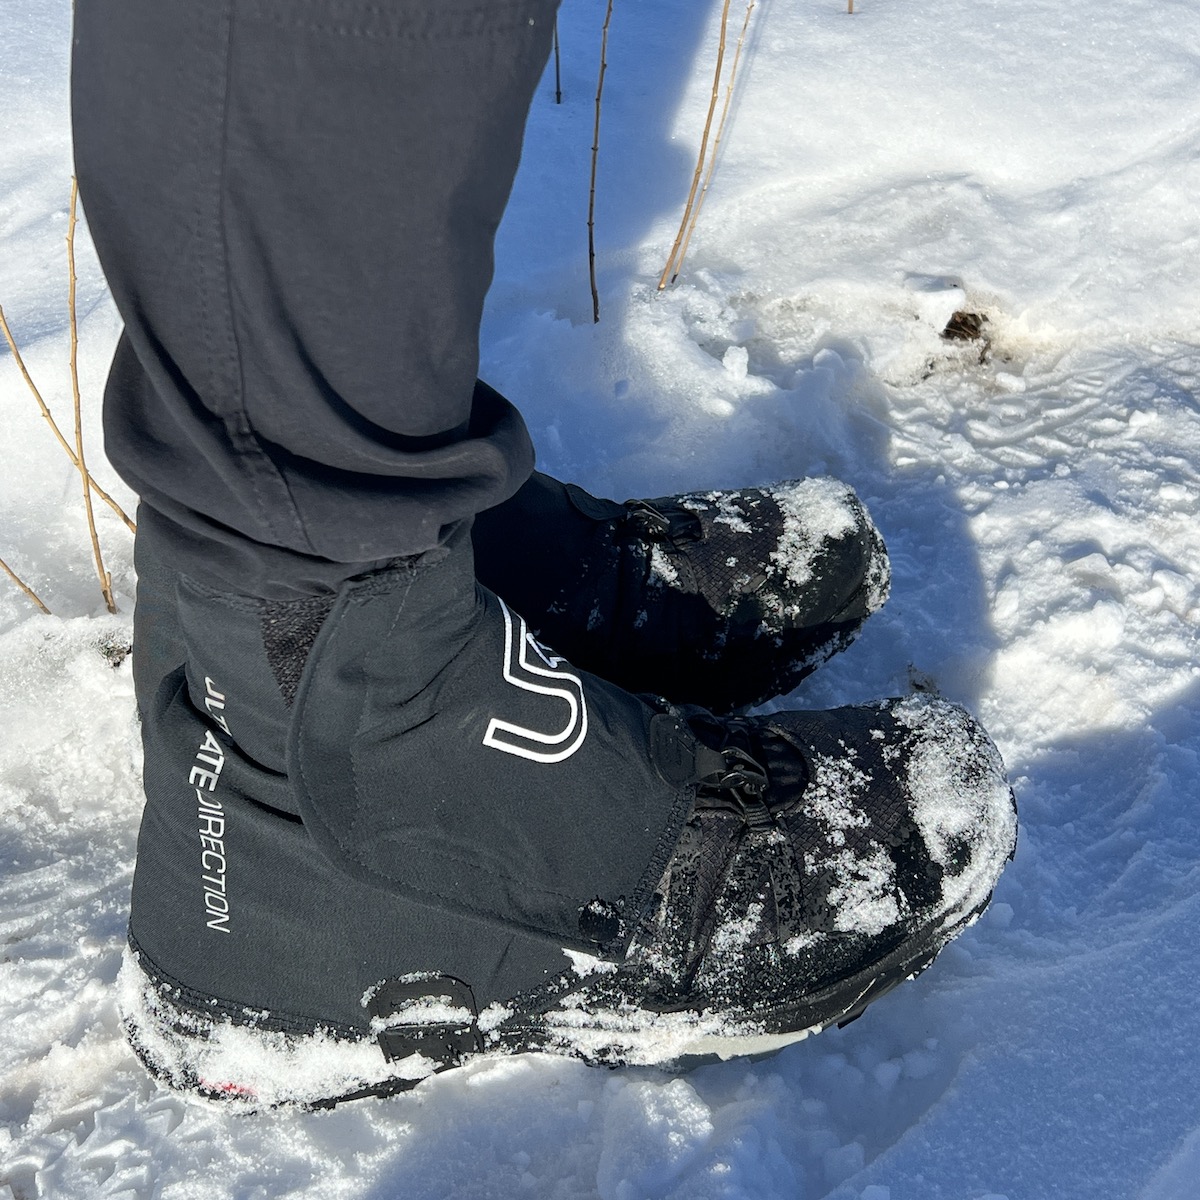 Best gaiters for hiking